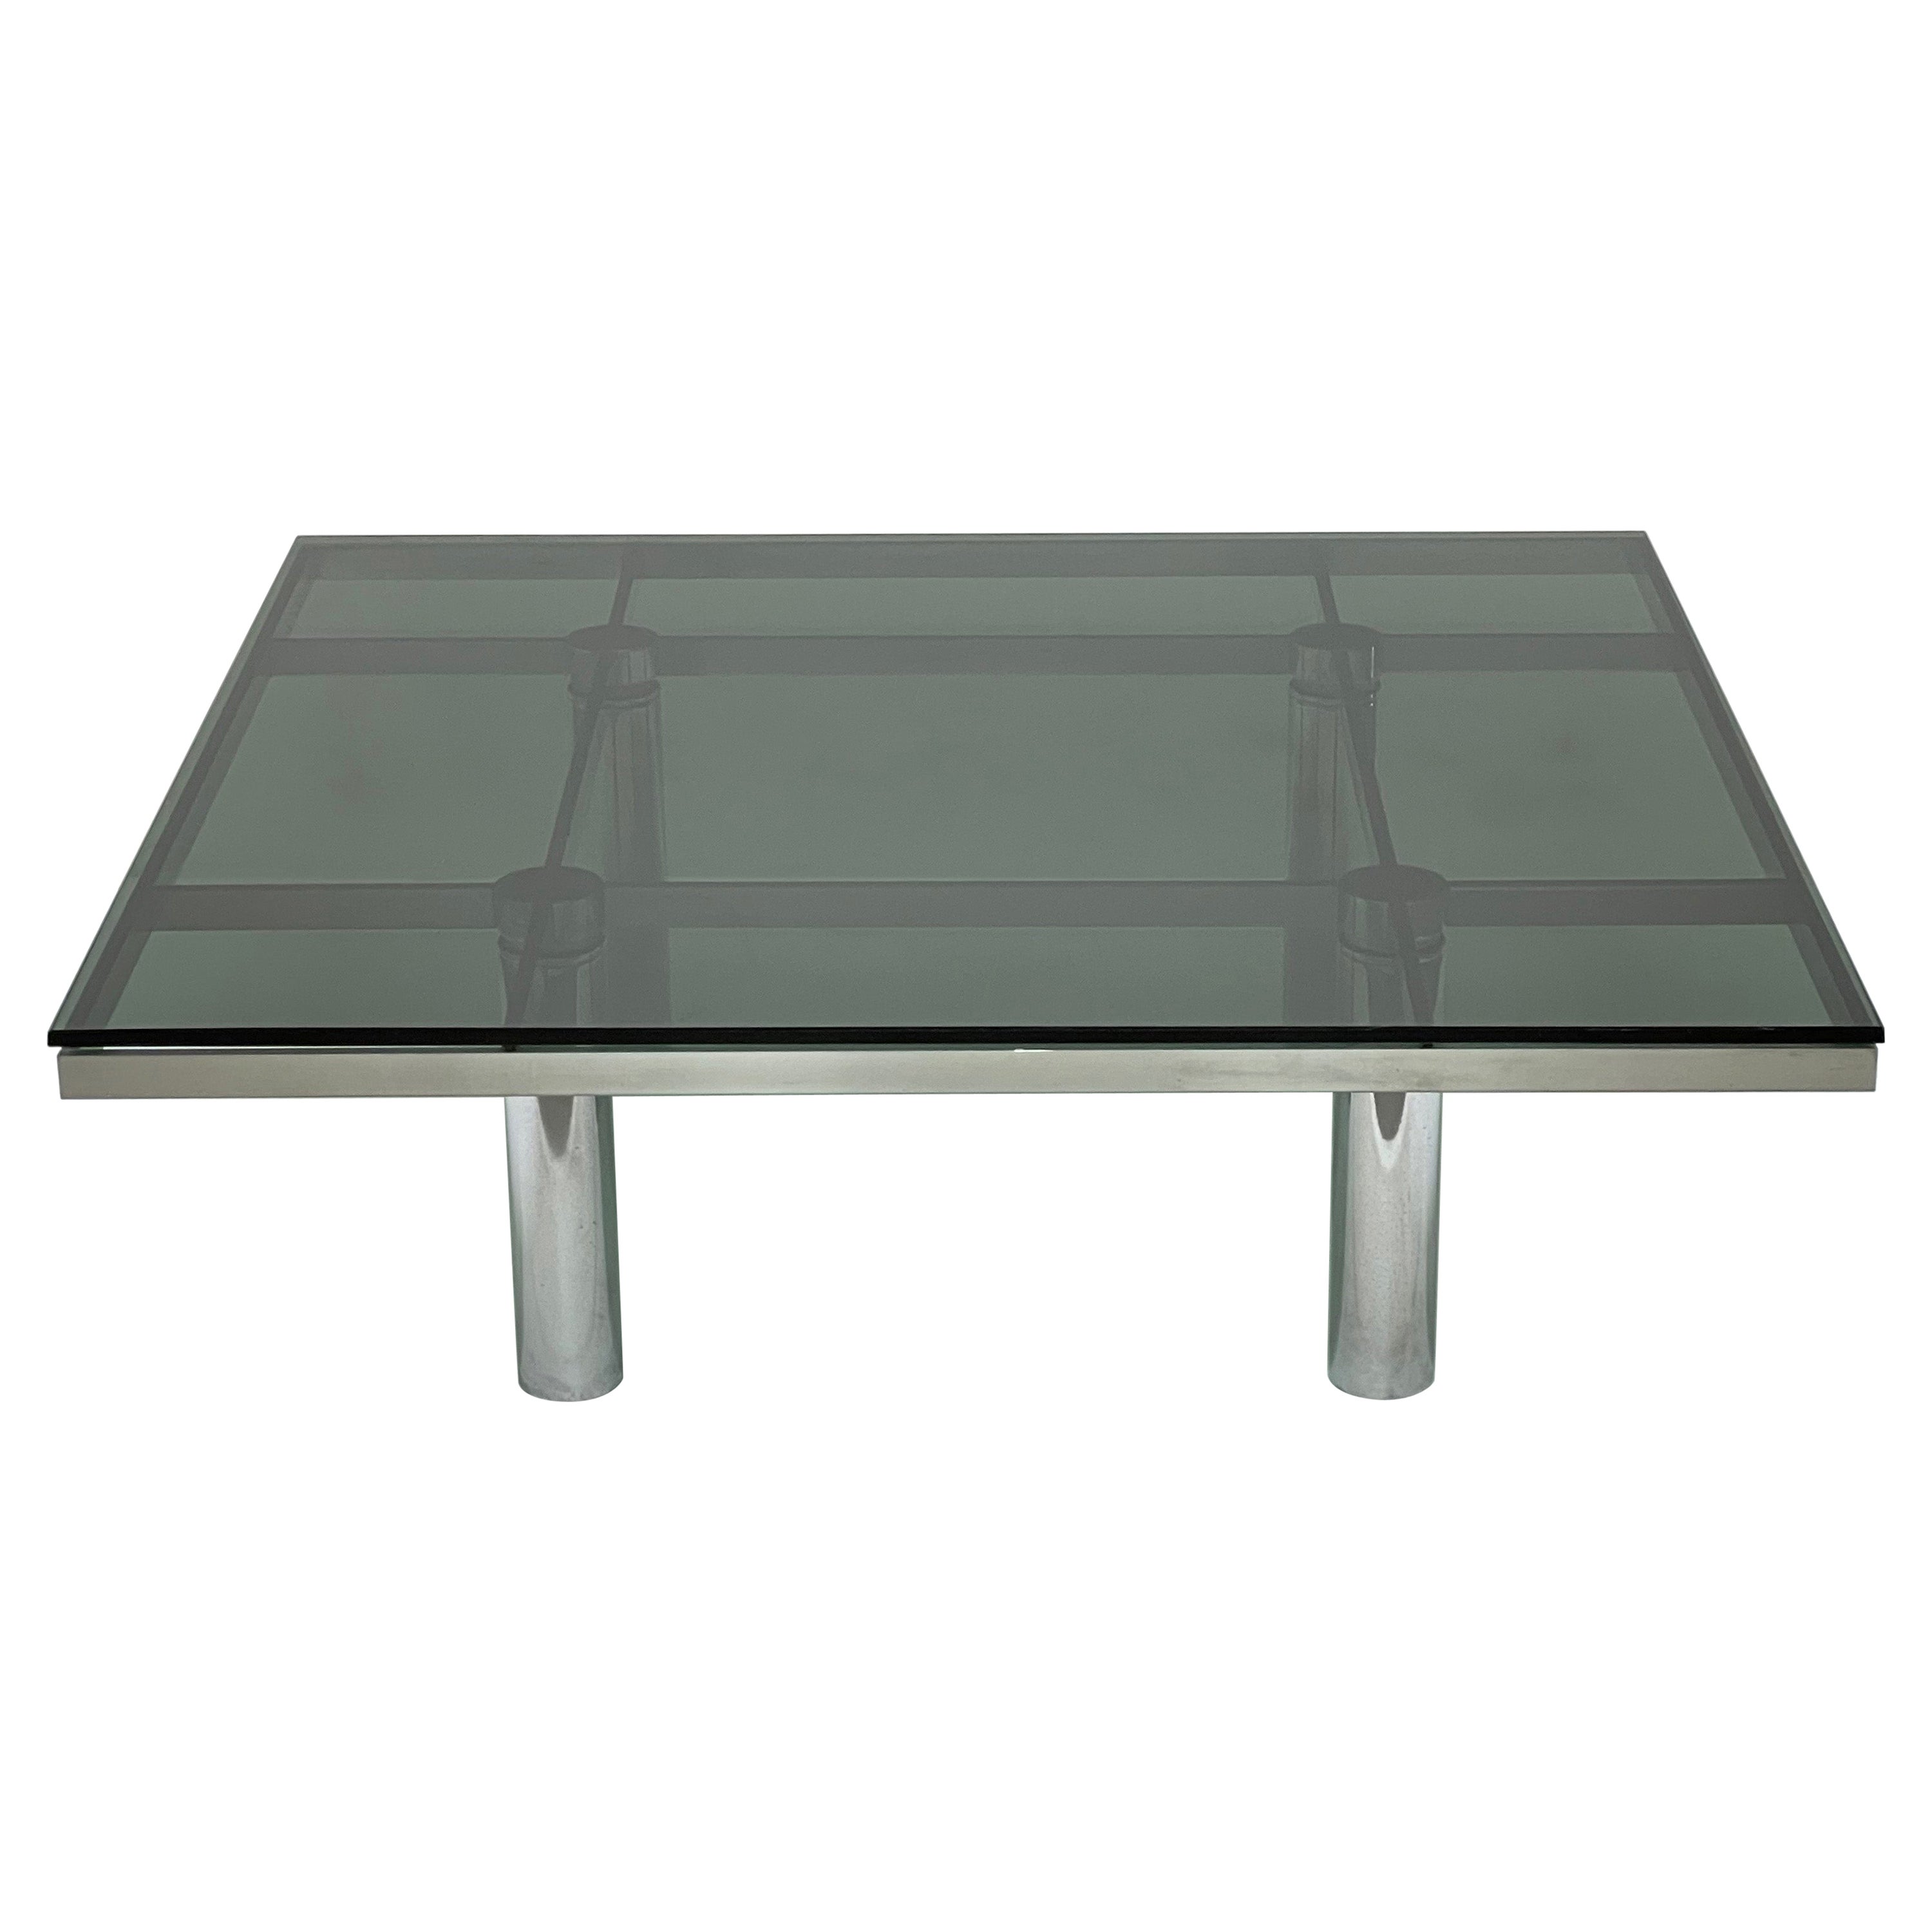 Tobia Scarpa Midcentury "Andre" Glass and Steel Coffee Table for Gavina, Italy